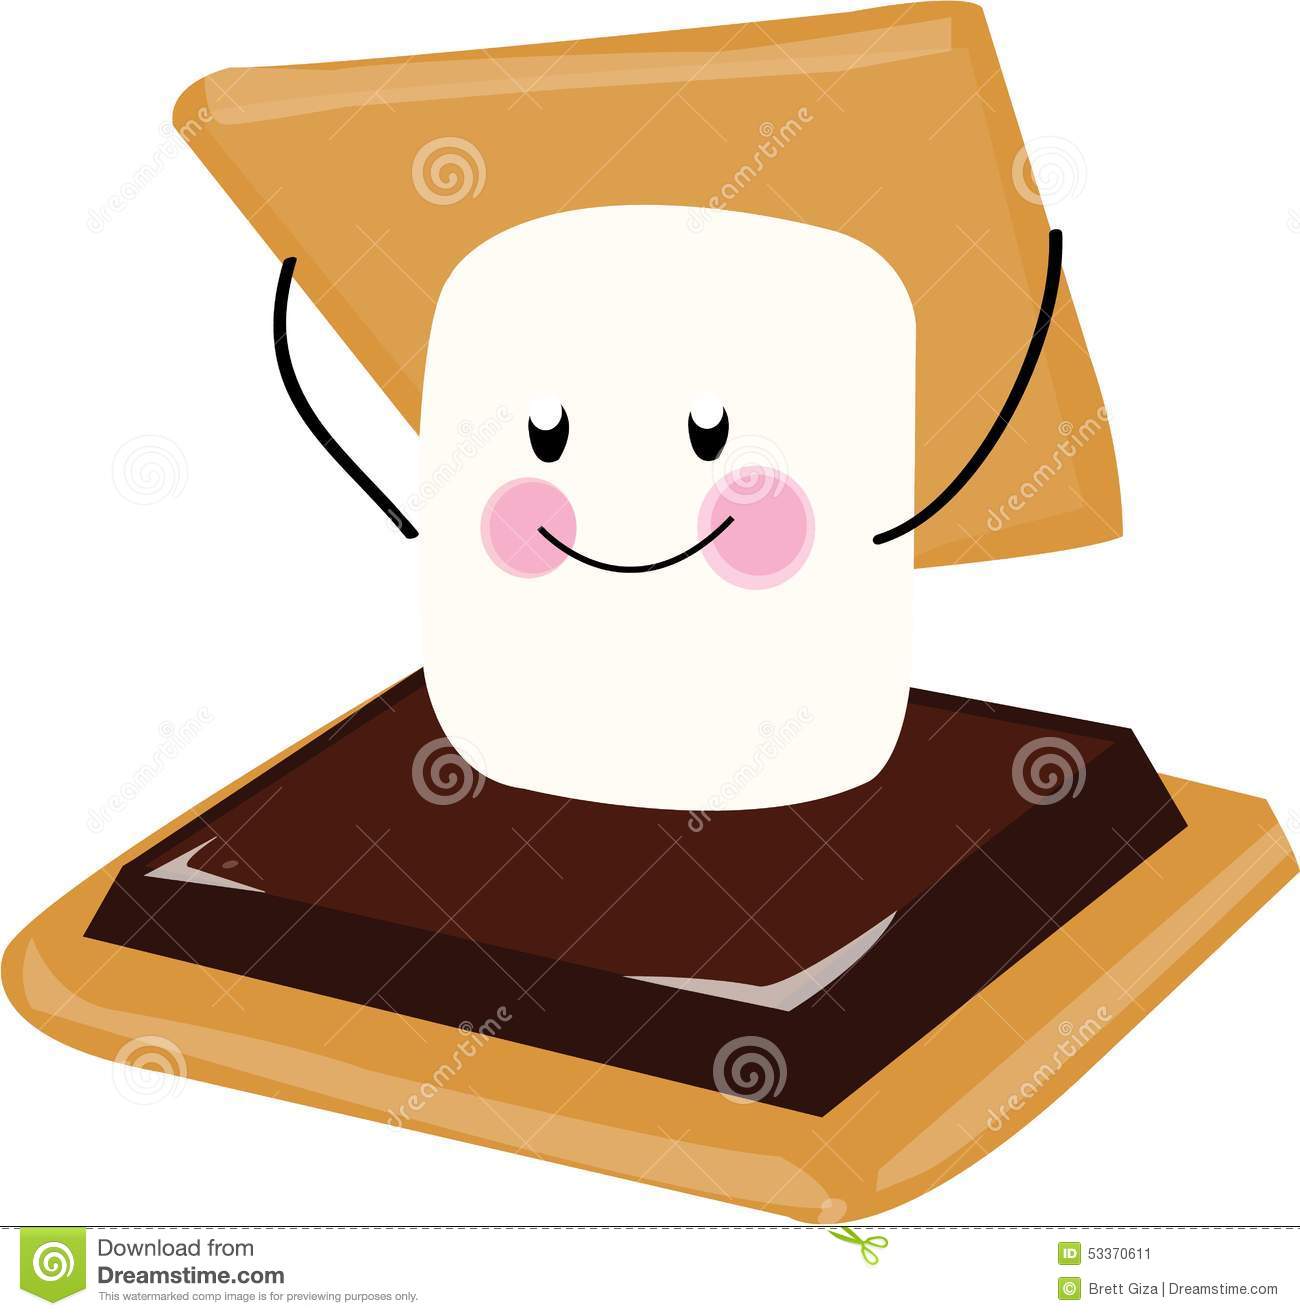 Roasting Smores Clipart Galle